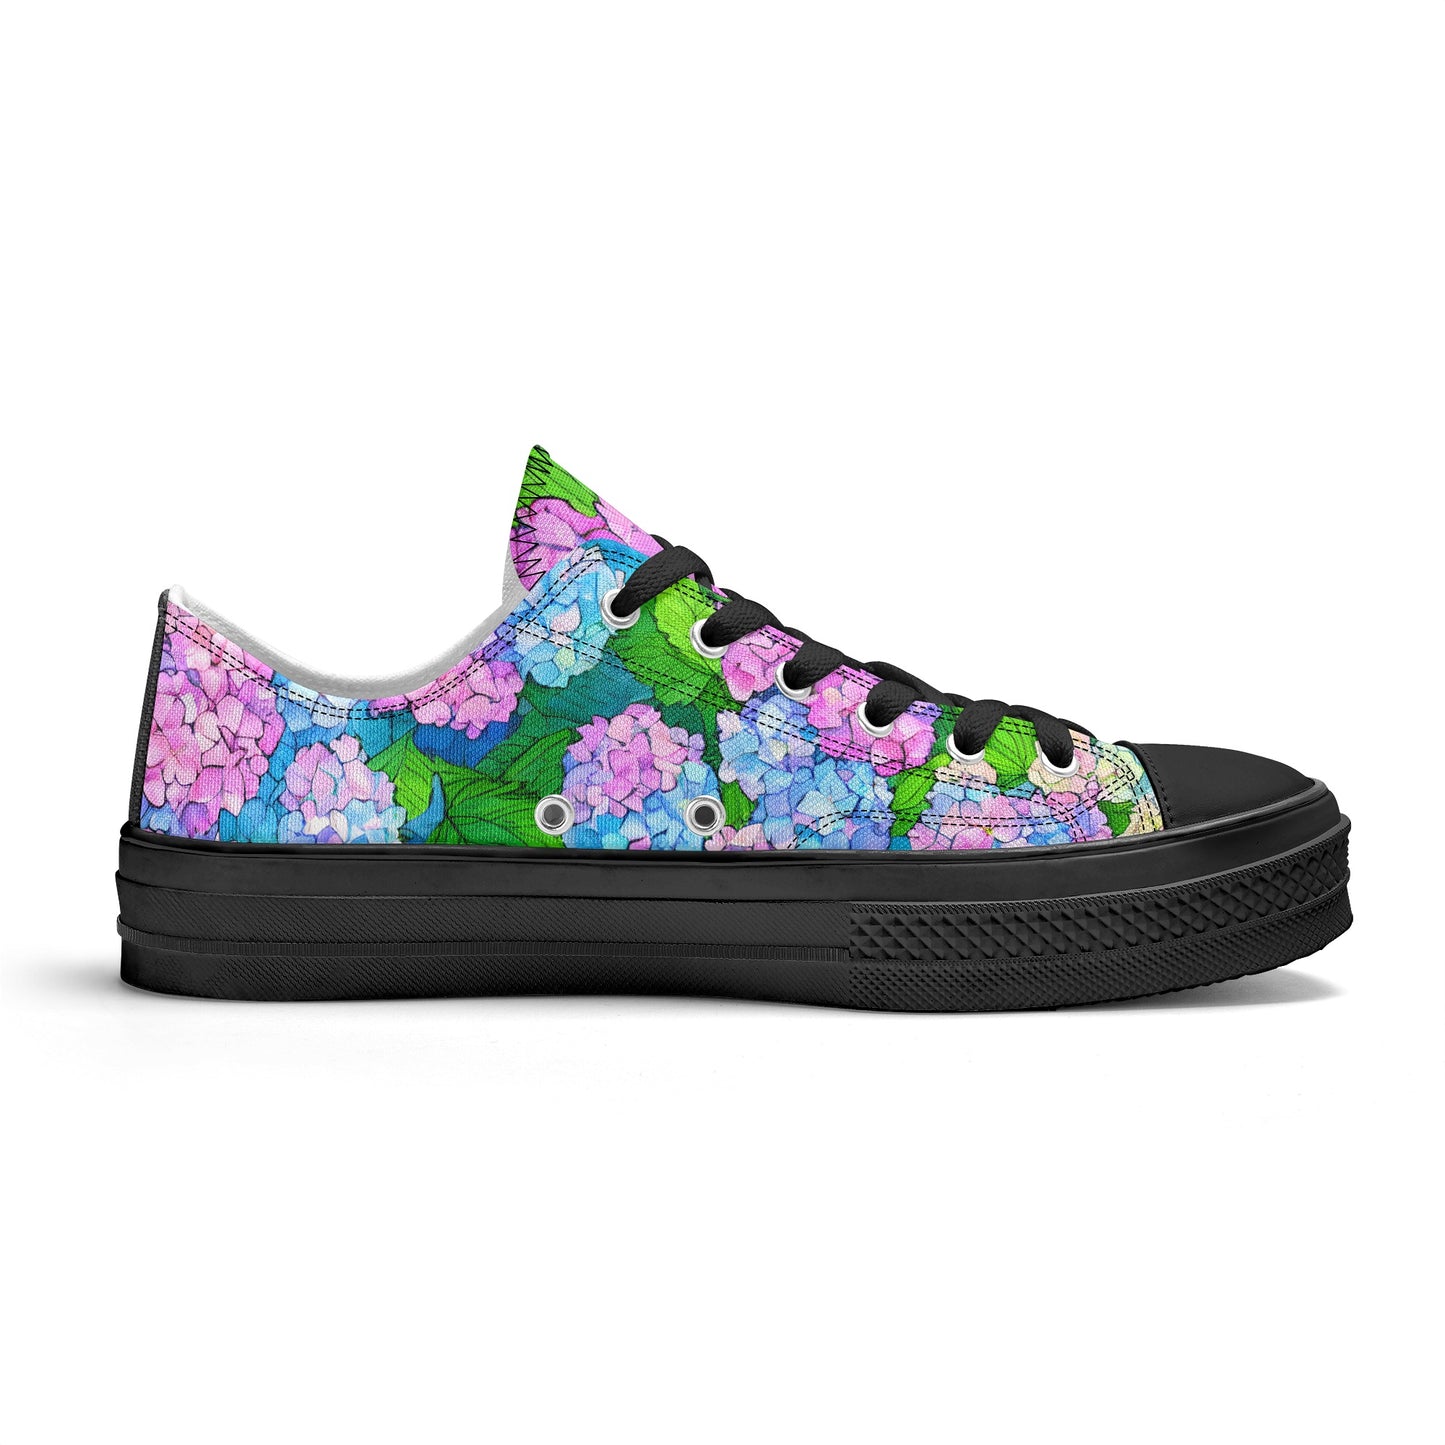 Hydrangea Womens Low Top Shoes, Garden Classic Canvas Converse Sneakers.